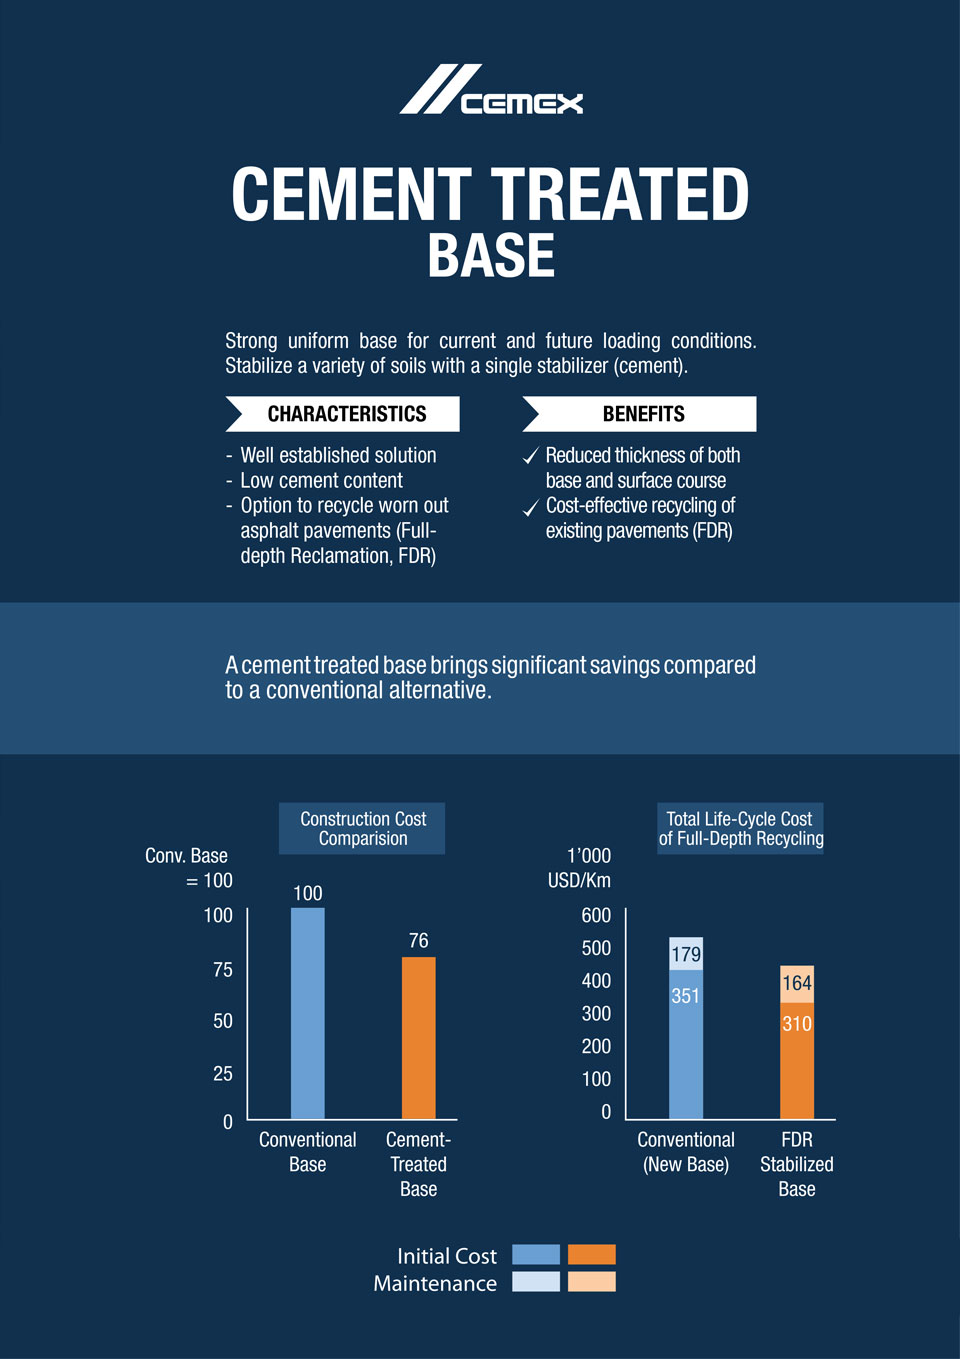 the image shows characteristics and benefits of cement trated base